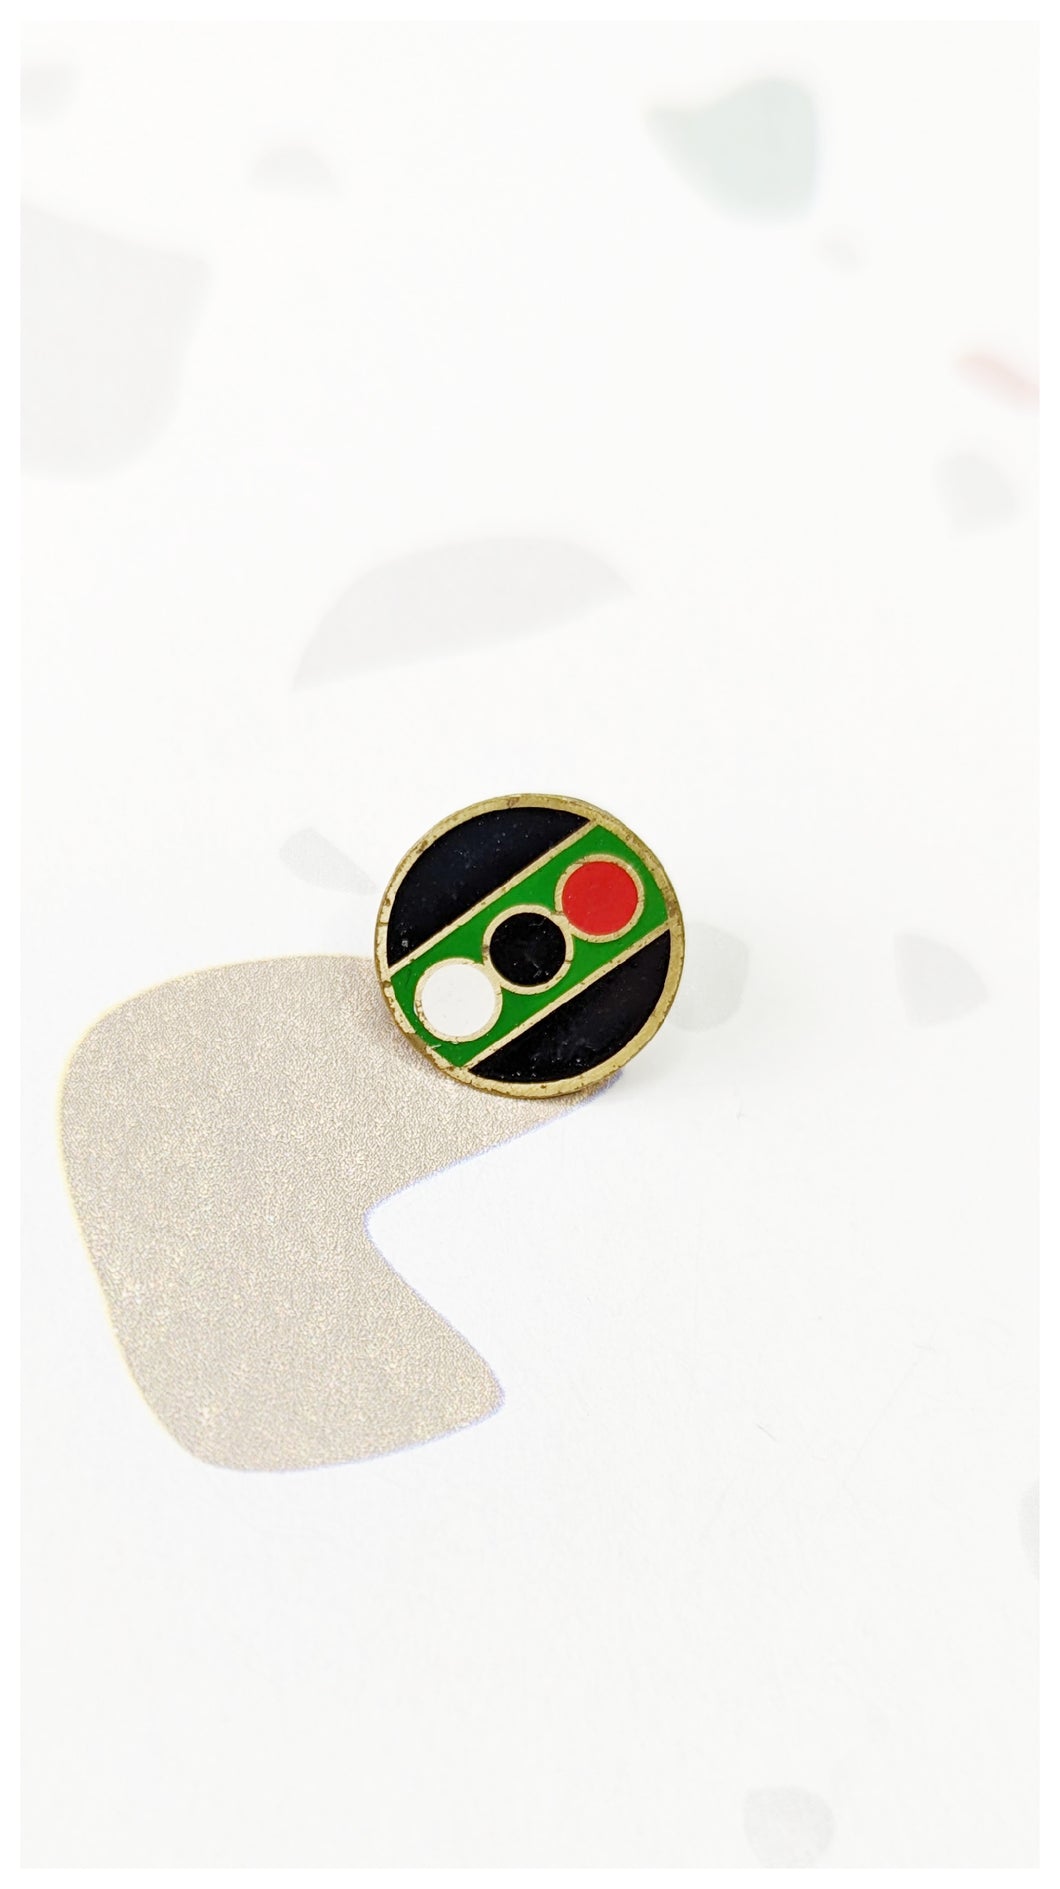 Pin's rond à pois 80s